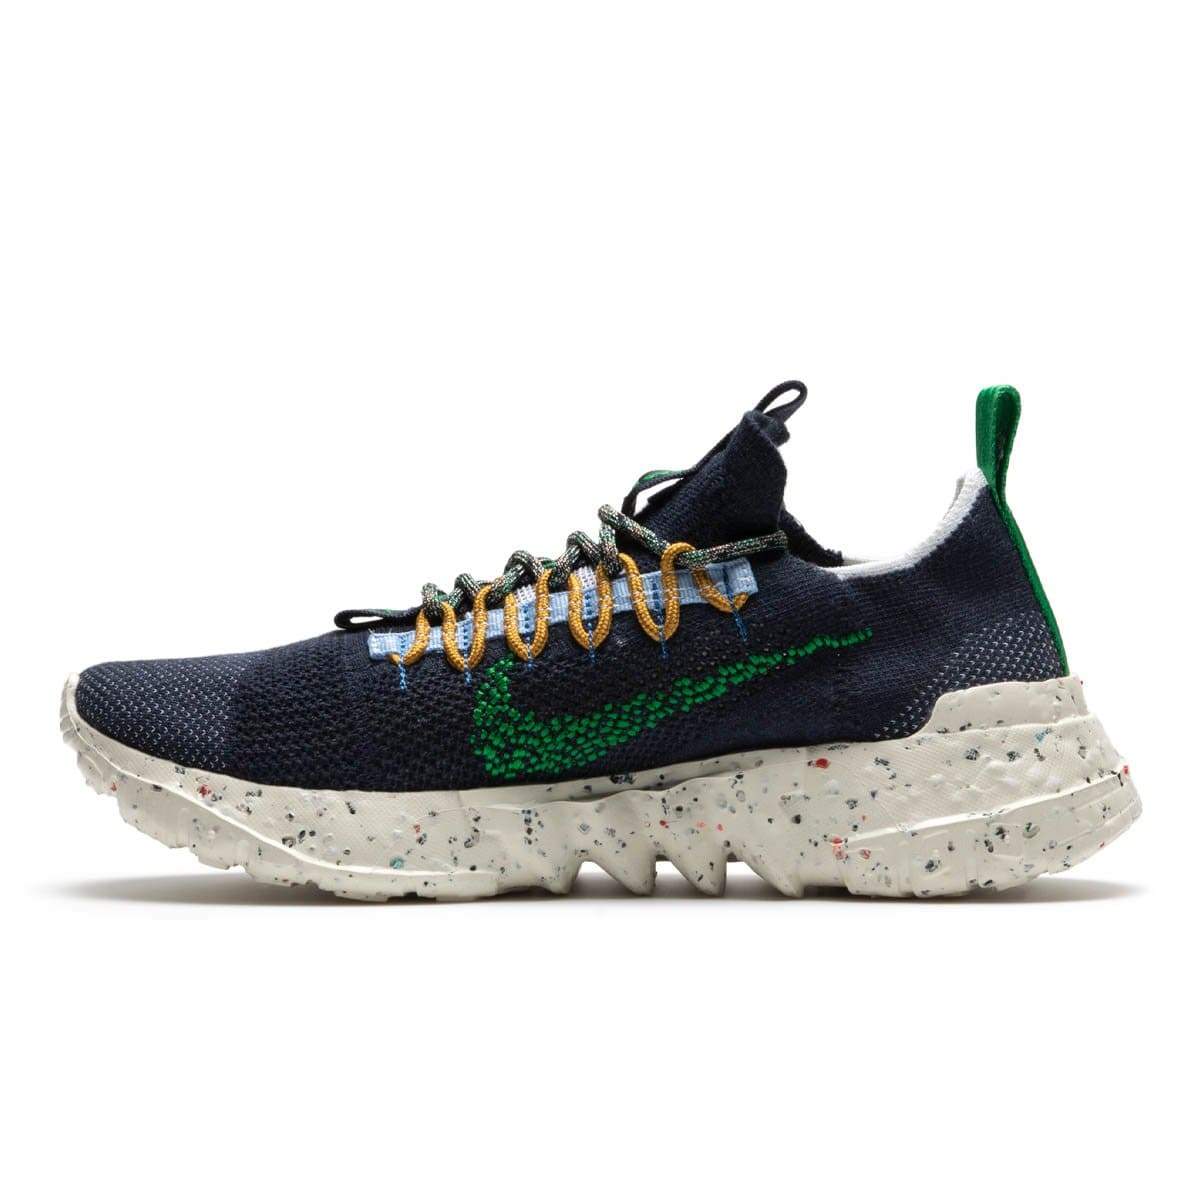 Nike Athletic SPACE HIPPIE 01